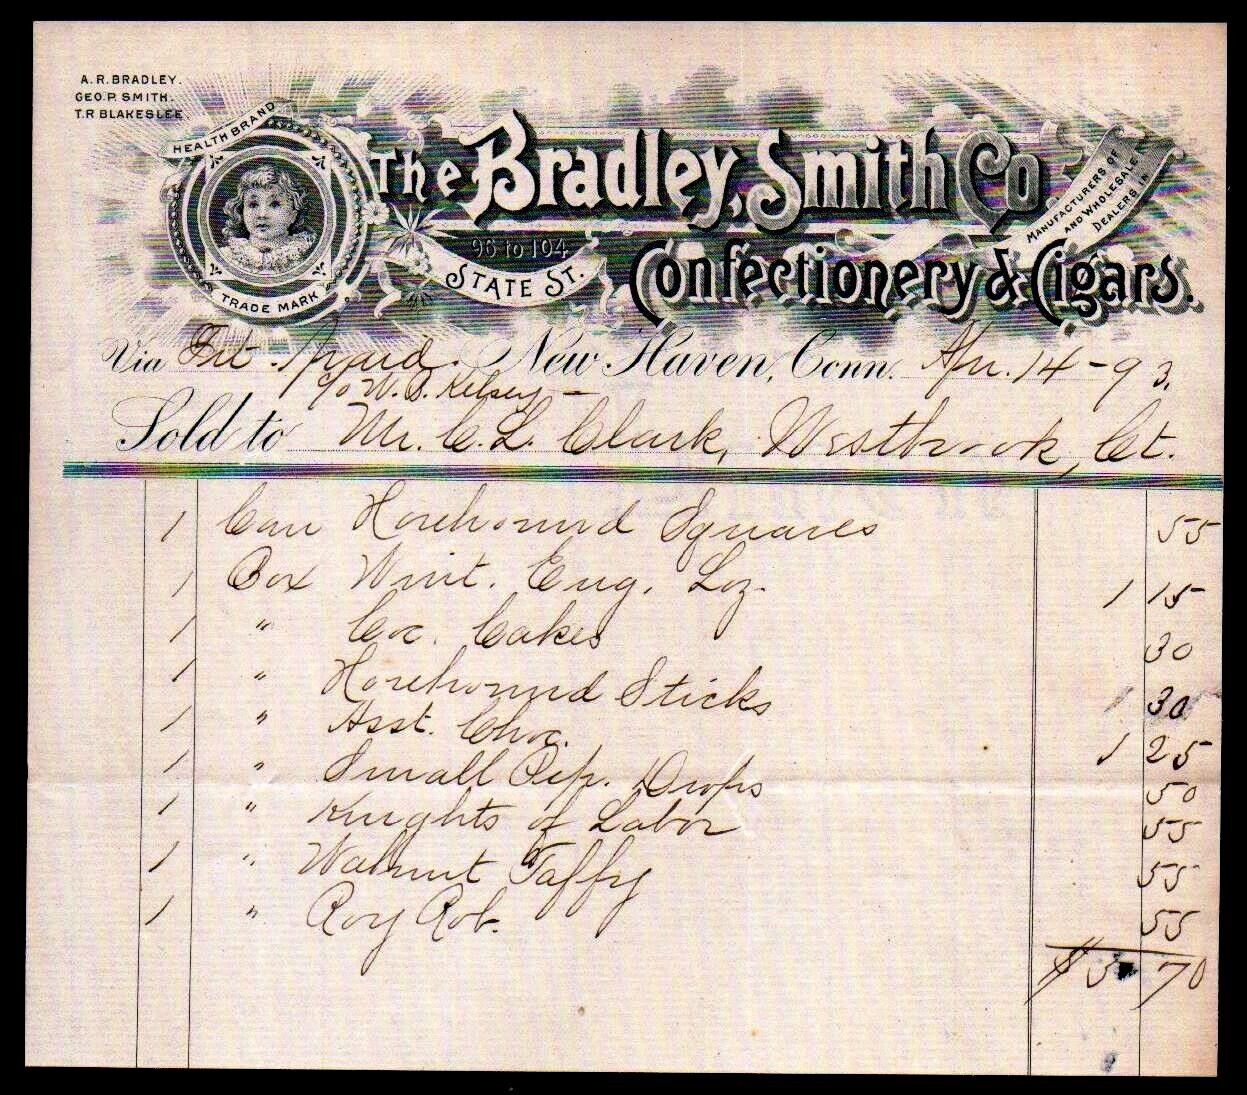 1893 New Haven Ct - Bradley Smith Co - Confectionery & Cigars - Letter Head Bill